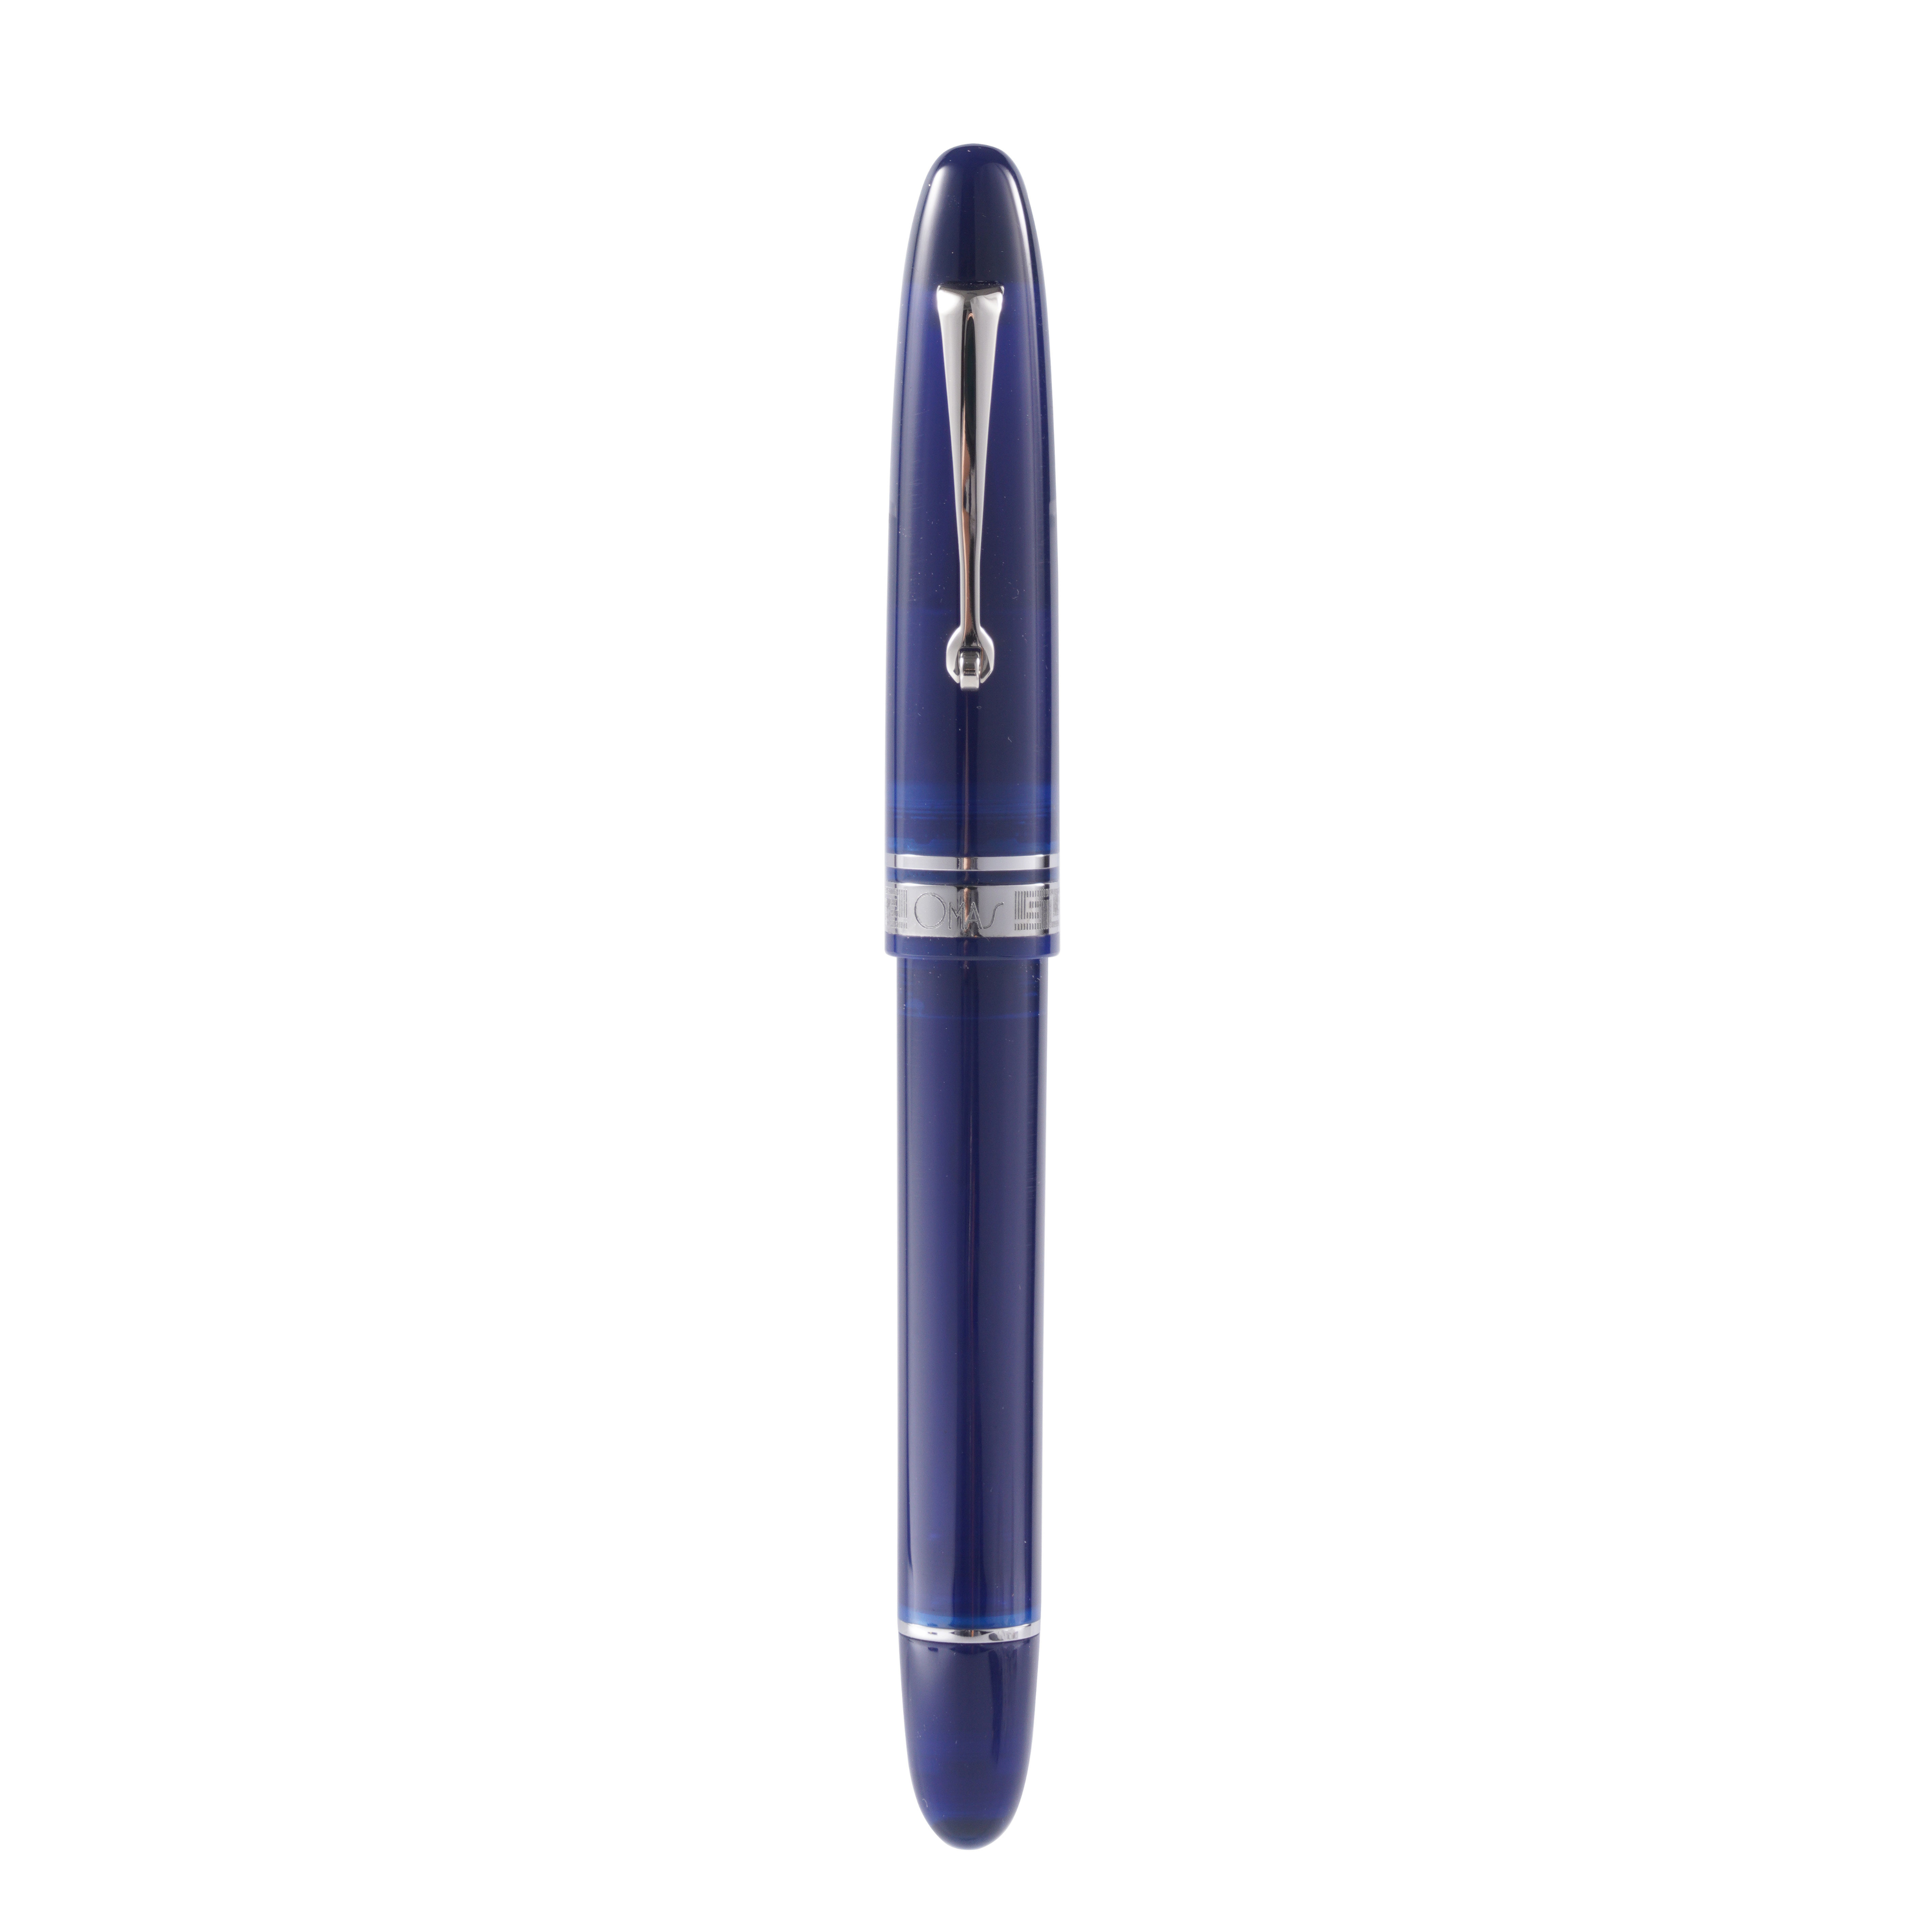 Omas Ogiva Rollerball Pen in Blu with Silver Trim